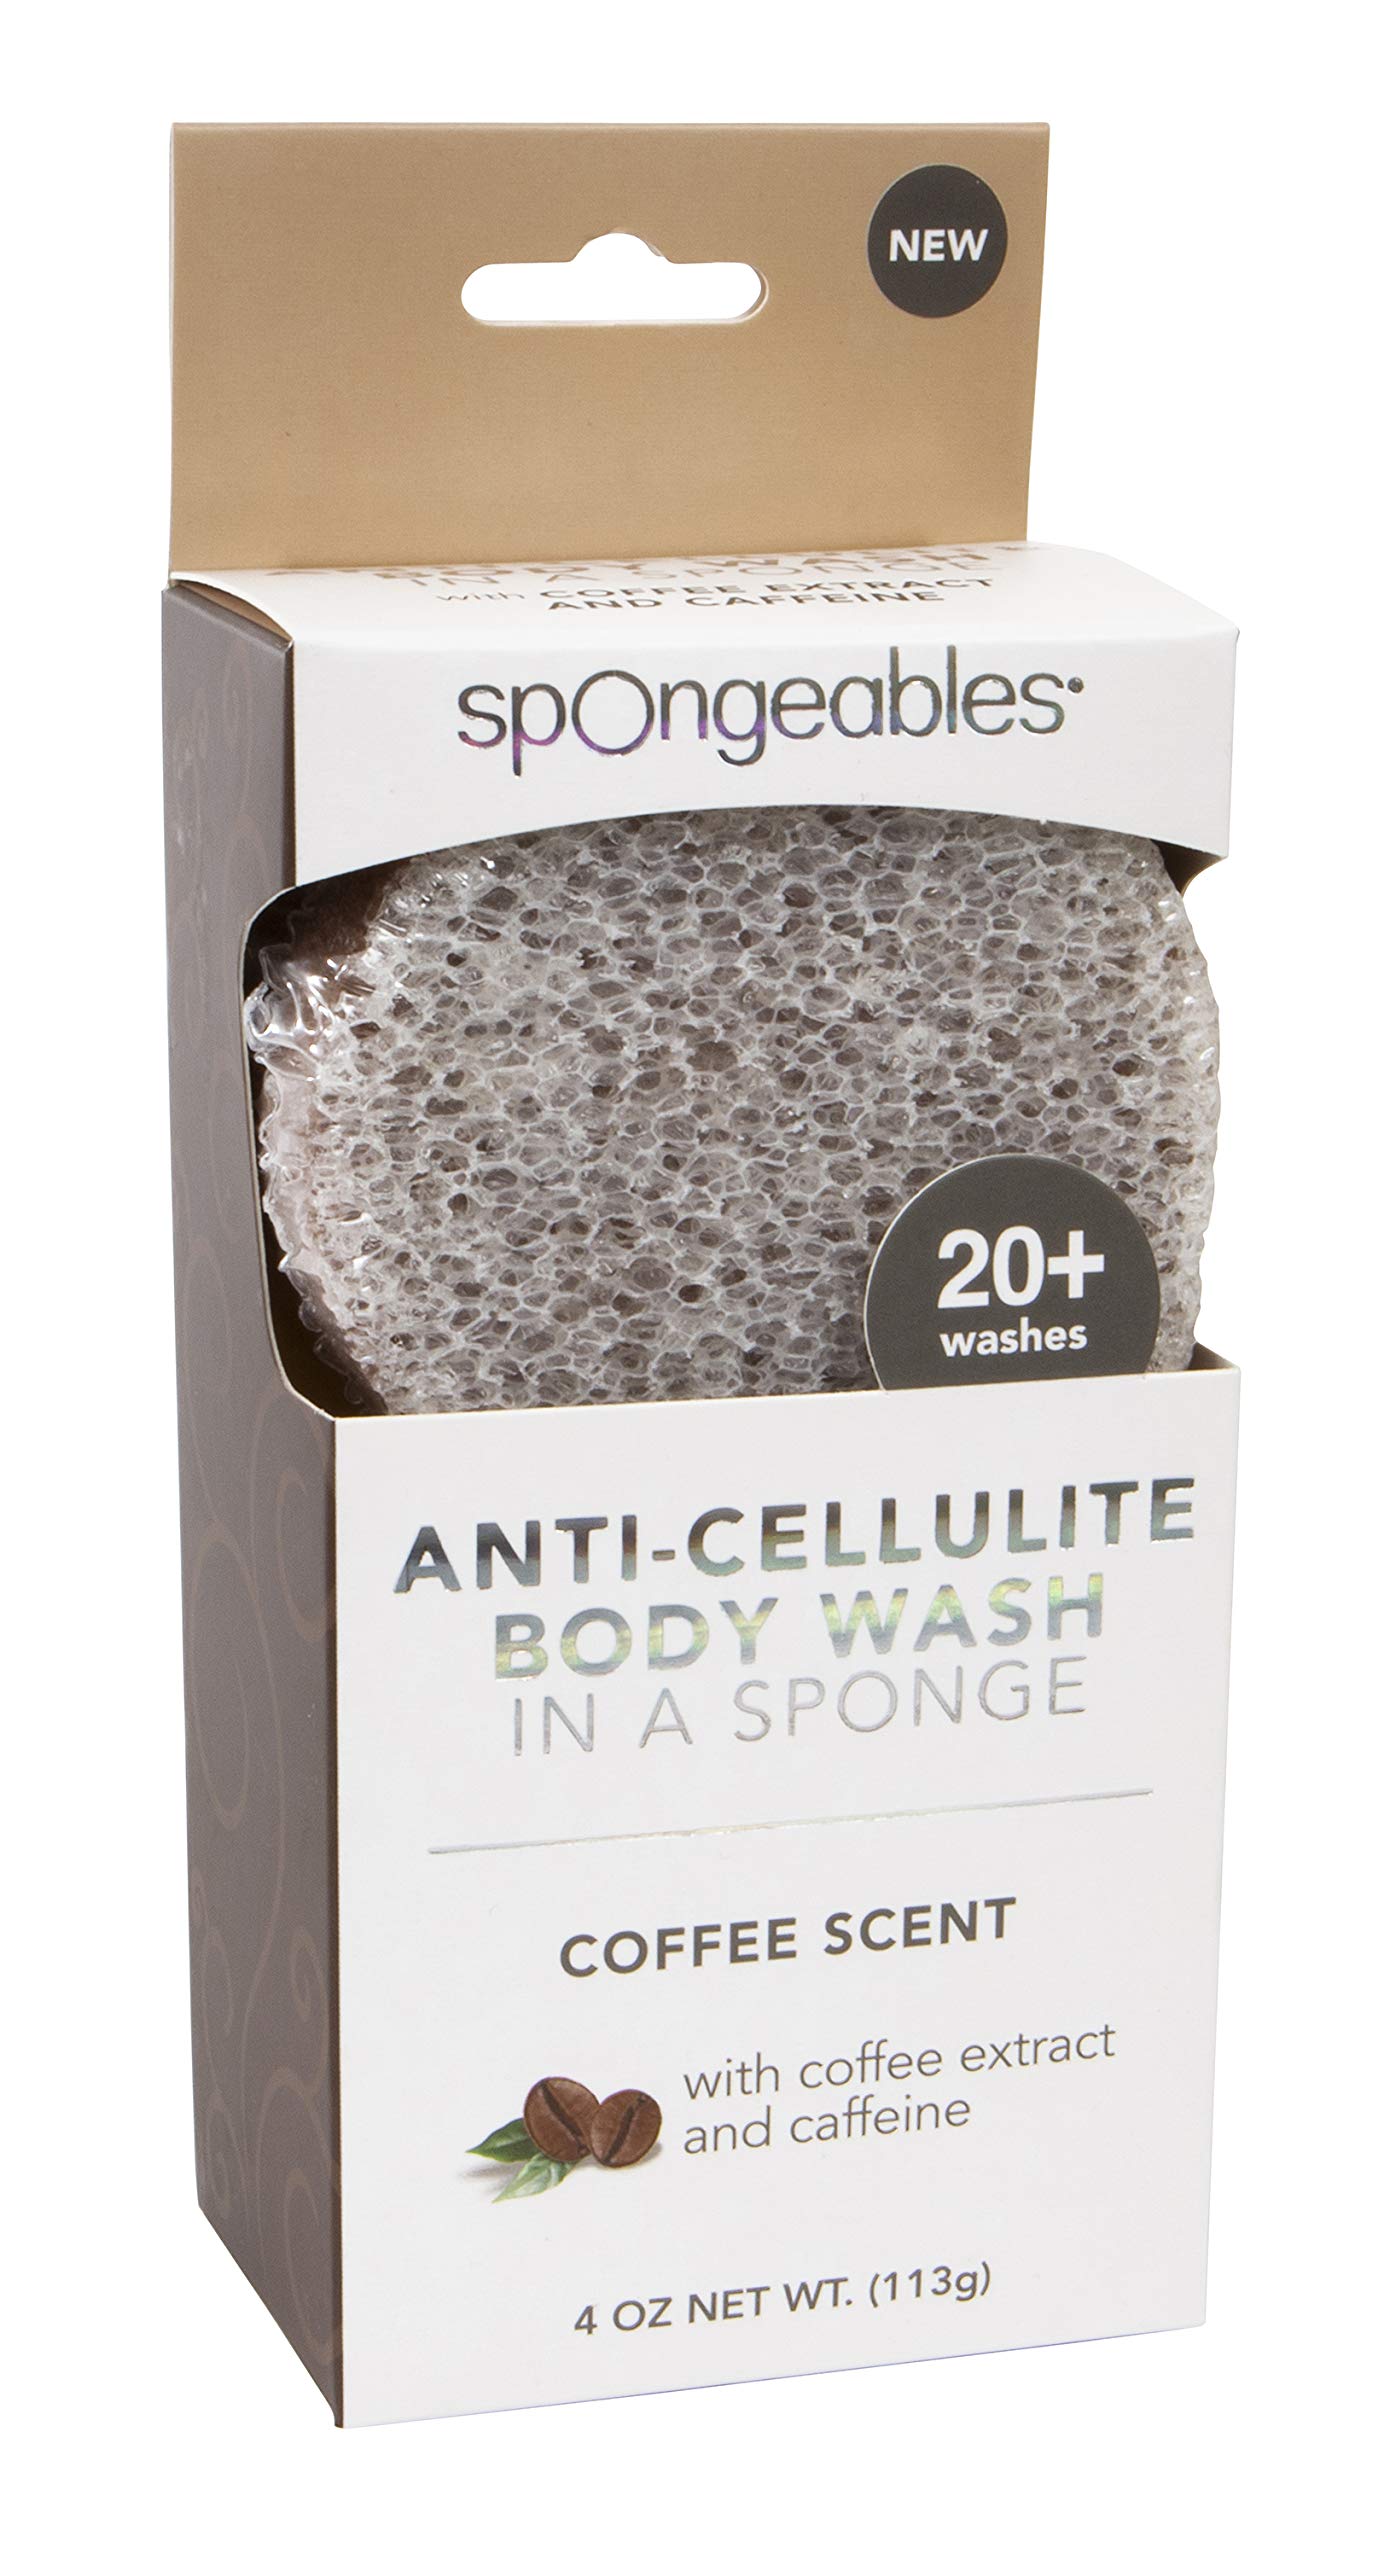 Spongeables Anti-Cellulite Body Wash in a Sponge Scent Spa Massager Moisturizer and Exfoliator 20+ Washes 4oz, Coffee, 1 Count